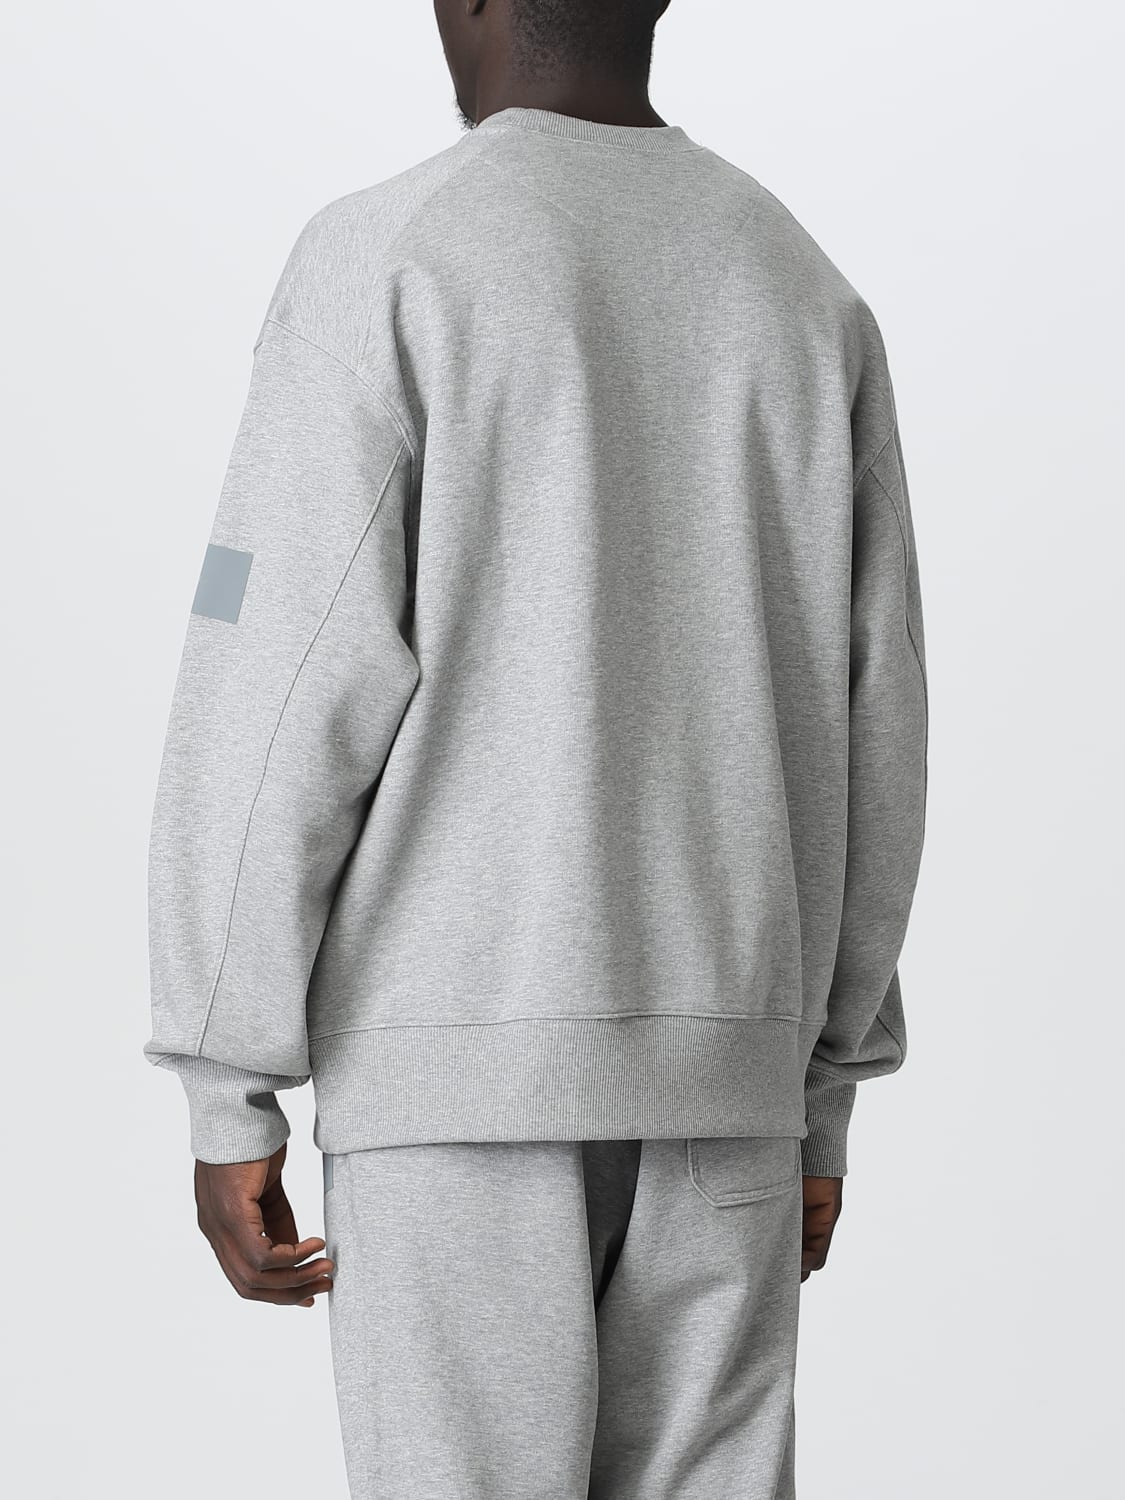 Y-3: sweater for man - Grey | Y-3 sweater IB4798 online at GIGLIO.COM